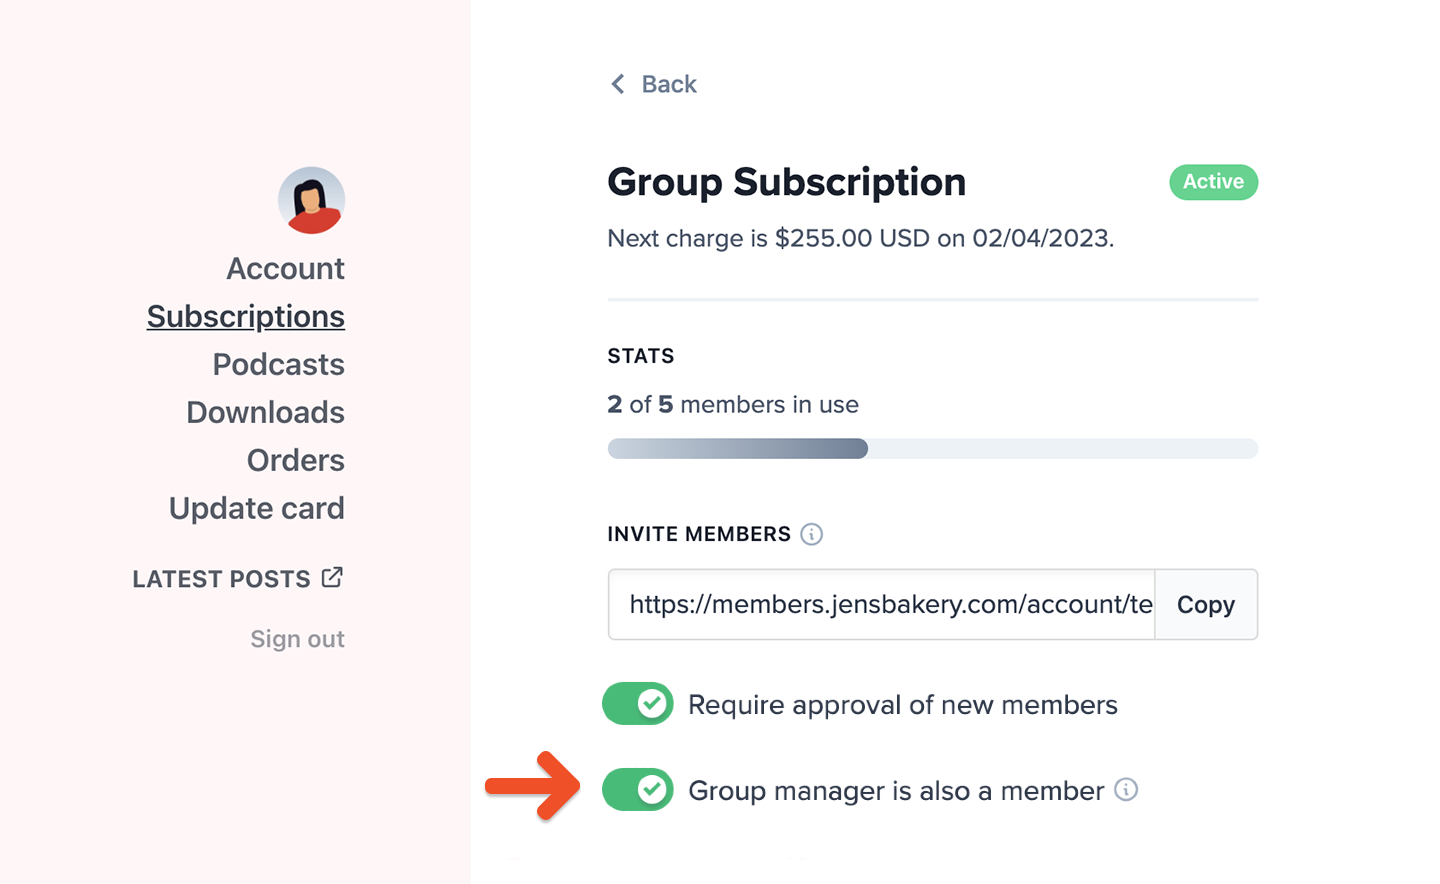 Group manager is also a member